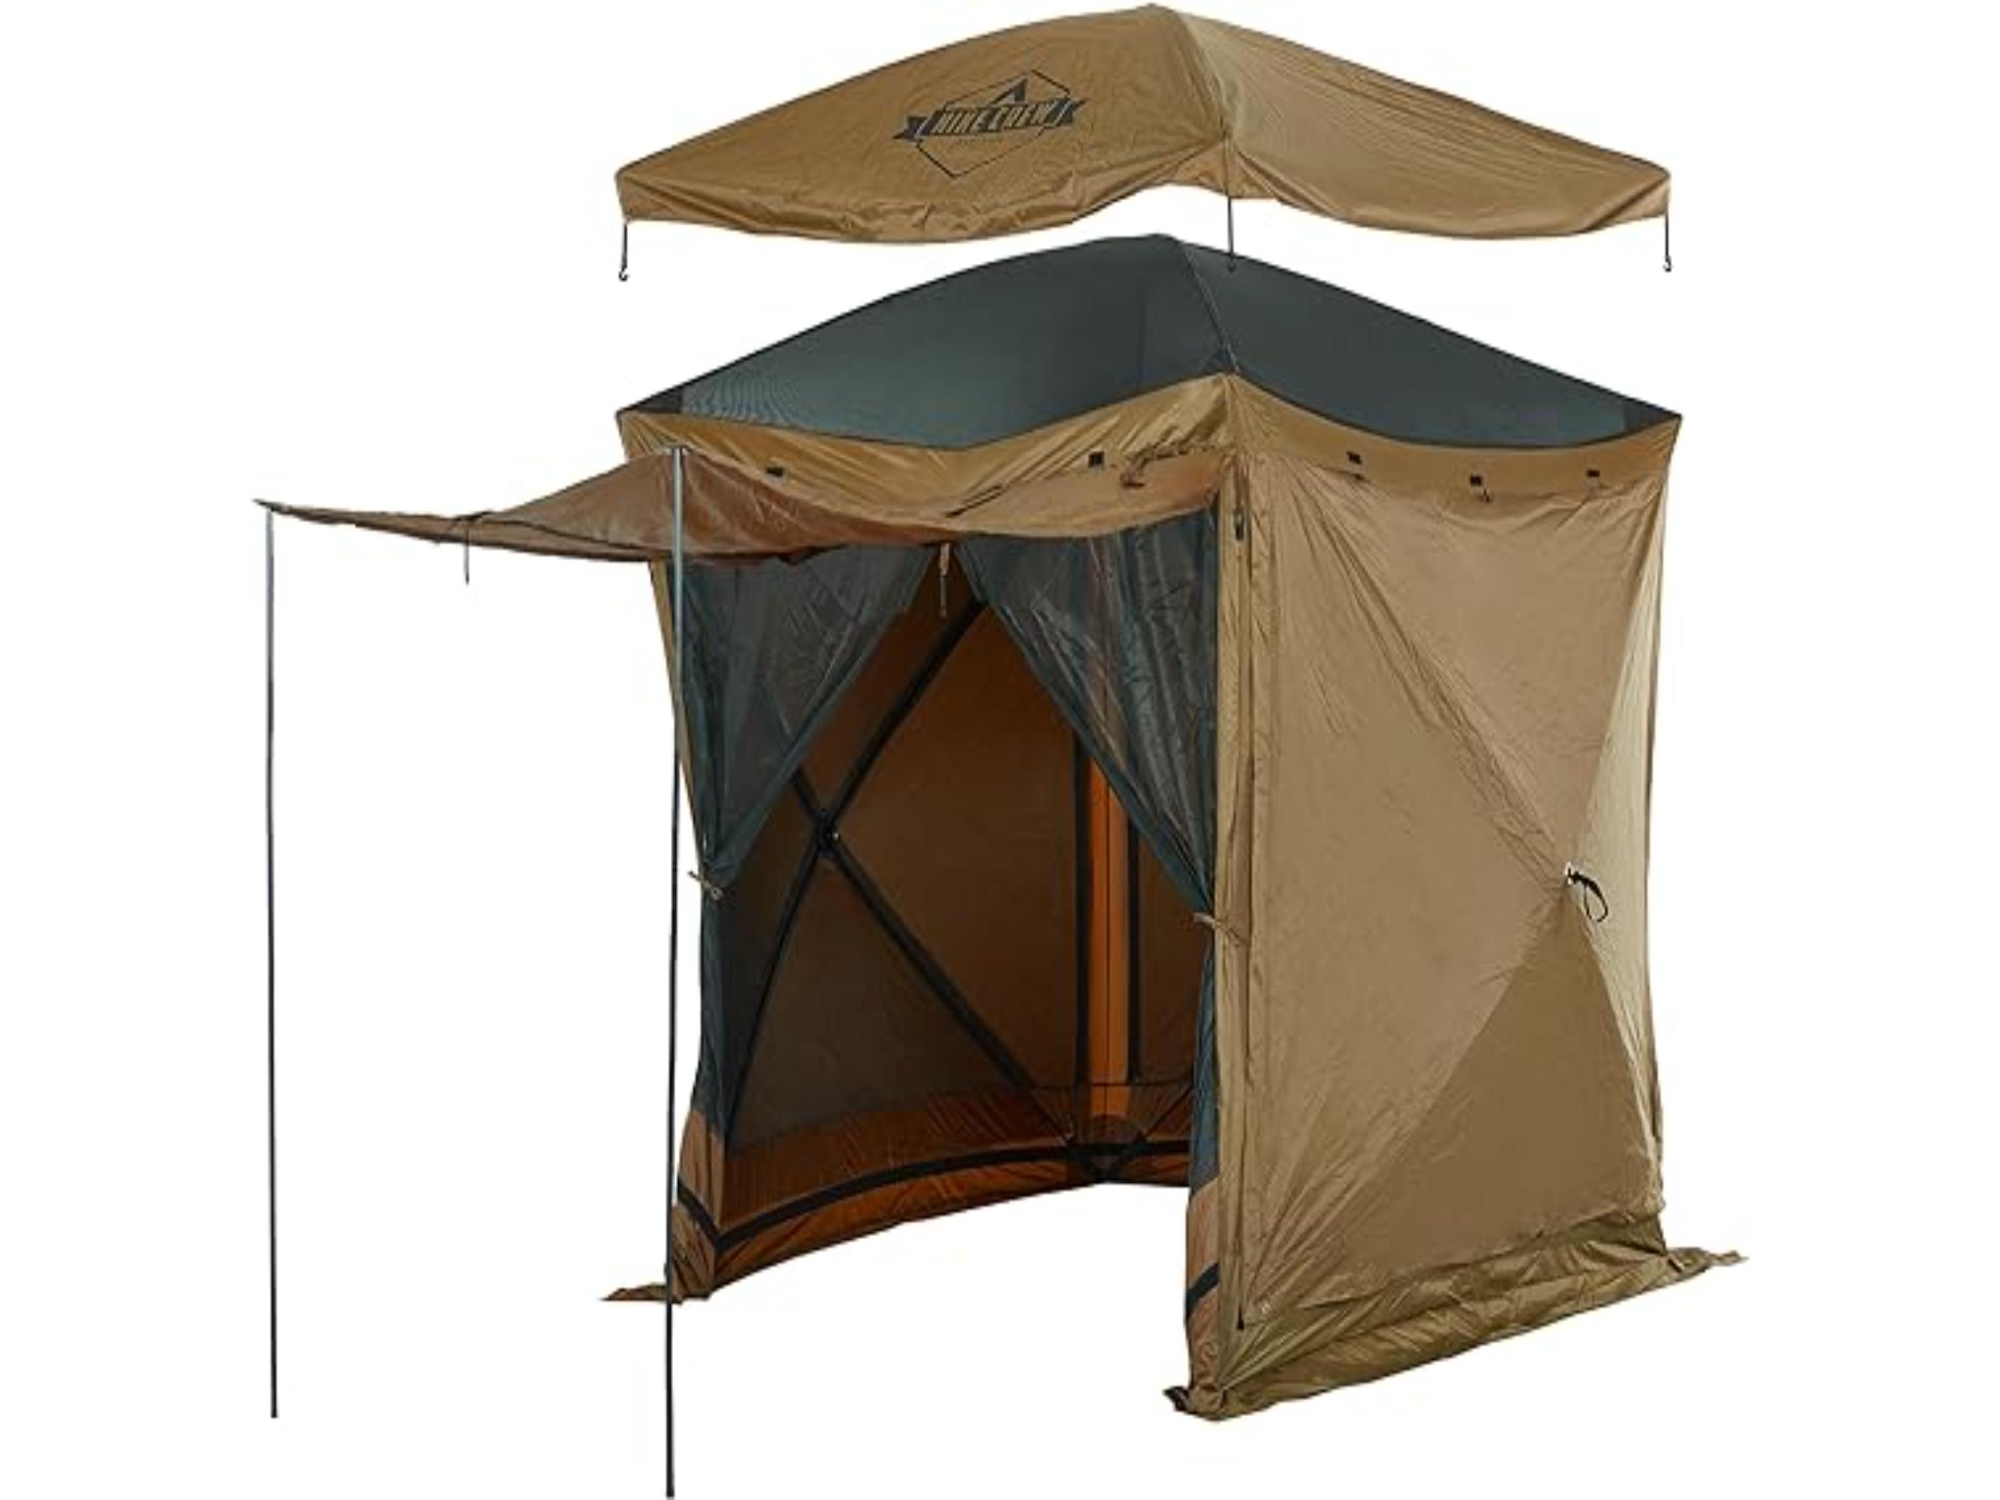 Hike Crew 6.5 x 6.5 Gazebo Tent, Outdoor Tent Canopy with Roof, Brown